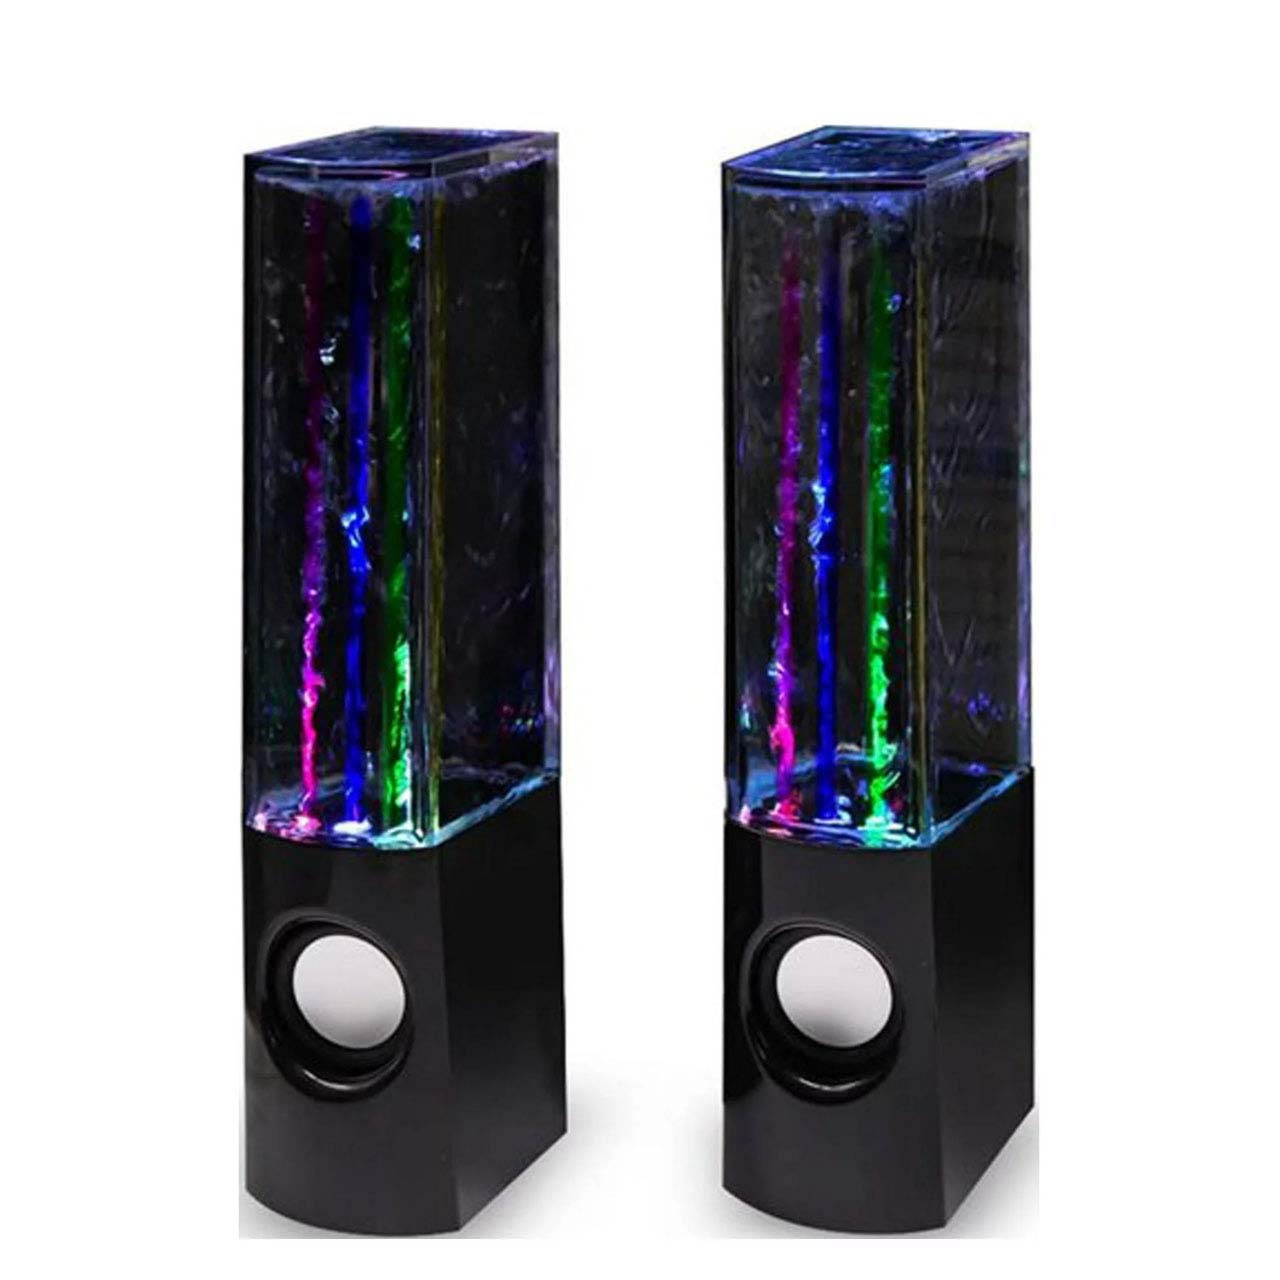 Black Aolyty Colorful LED Water Speaker with Dancing Fountain Light Show